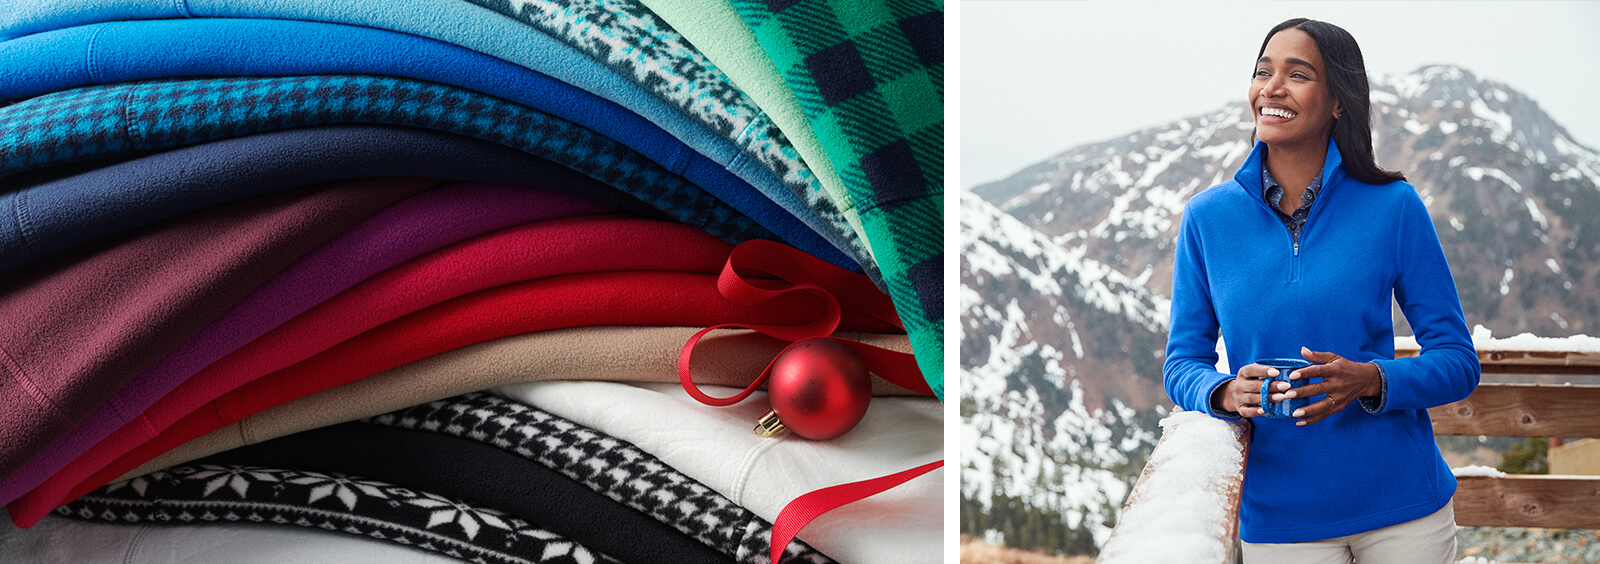 5 Essential Items to Pack for a Ski Vacation